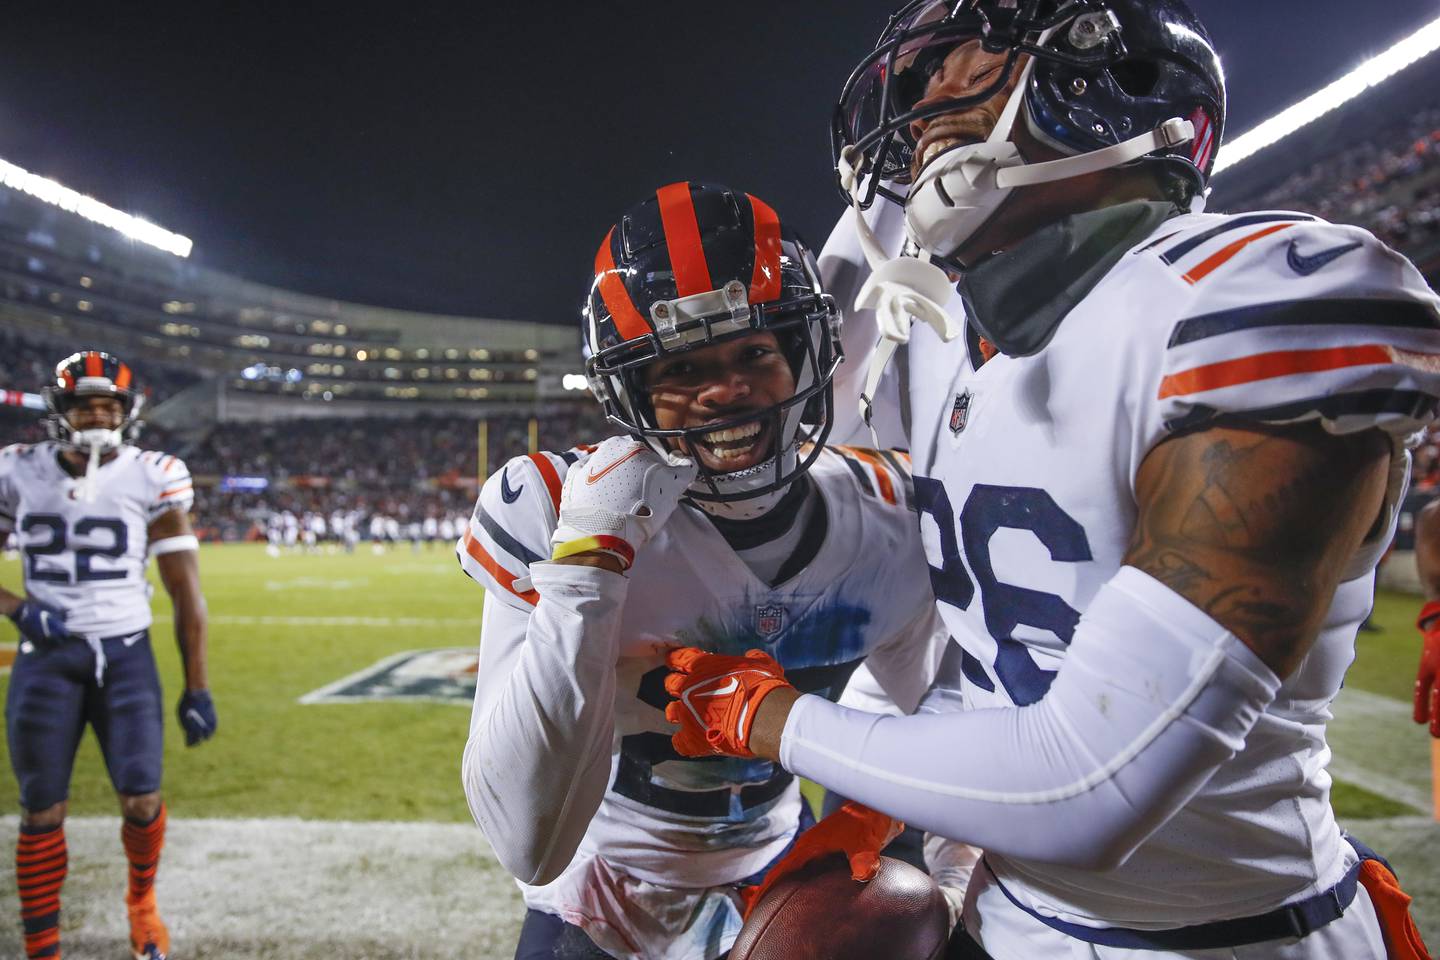 Chicago Bears safety Deon Bush, right, celebrates with cornerback Thomas Graham Jr. an interception against the Minnesota Vikings during the first half Monday, Dec. 20, 2021, in Chicago.